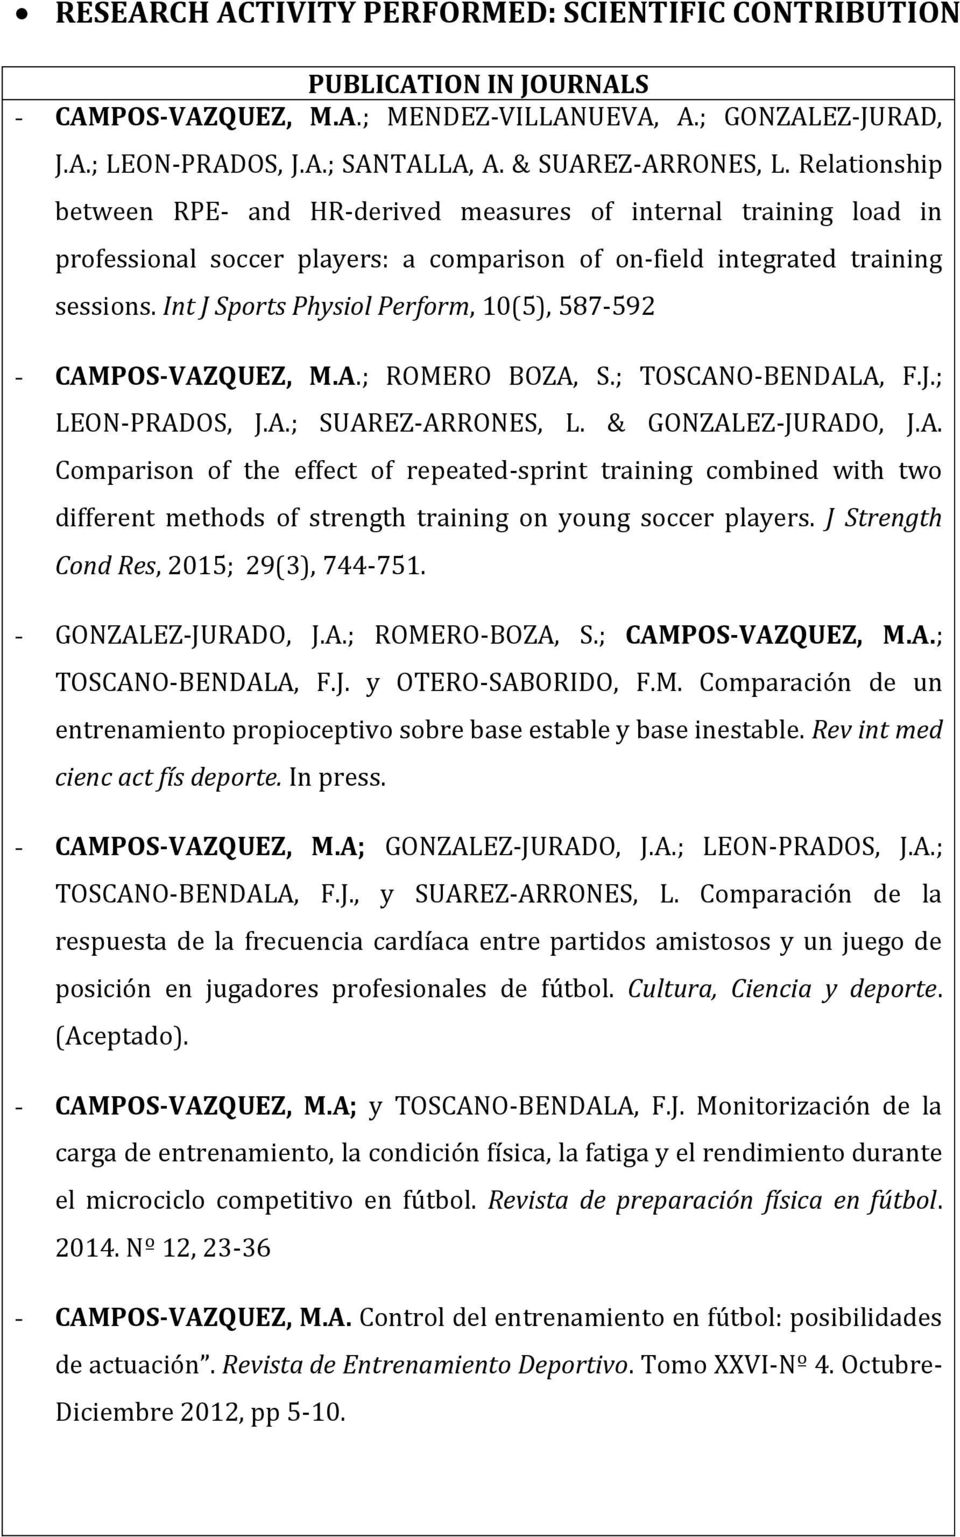 Int J Sports Physiol Perform, 10(5), 587-592 - CAMPOS-VAZQUEZ, M.A.; ROMERO BOZA, S.; TOSCANO-BENDALA, F.J.; LEON-PRADOS, J.A.; SUAREZ-ARRONES, L. & GONZALEZ-JURADO, J.A. Comparison of the effect of repeated-sprint training combined with two different methods of strength training on young soccer players.